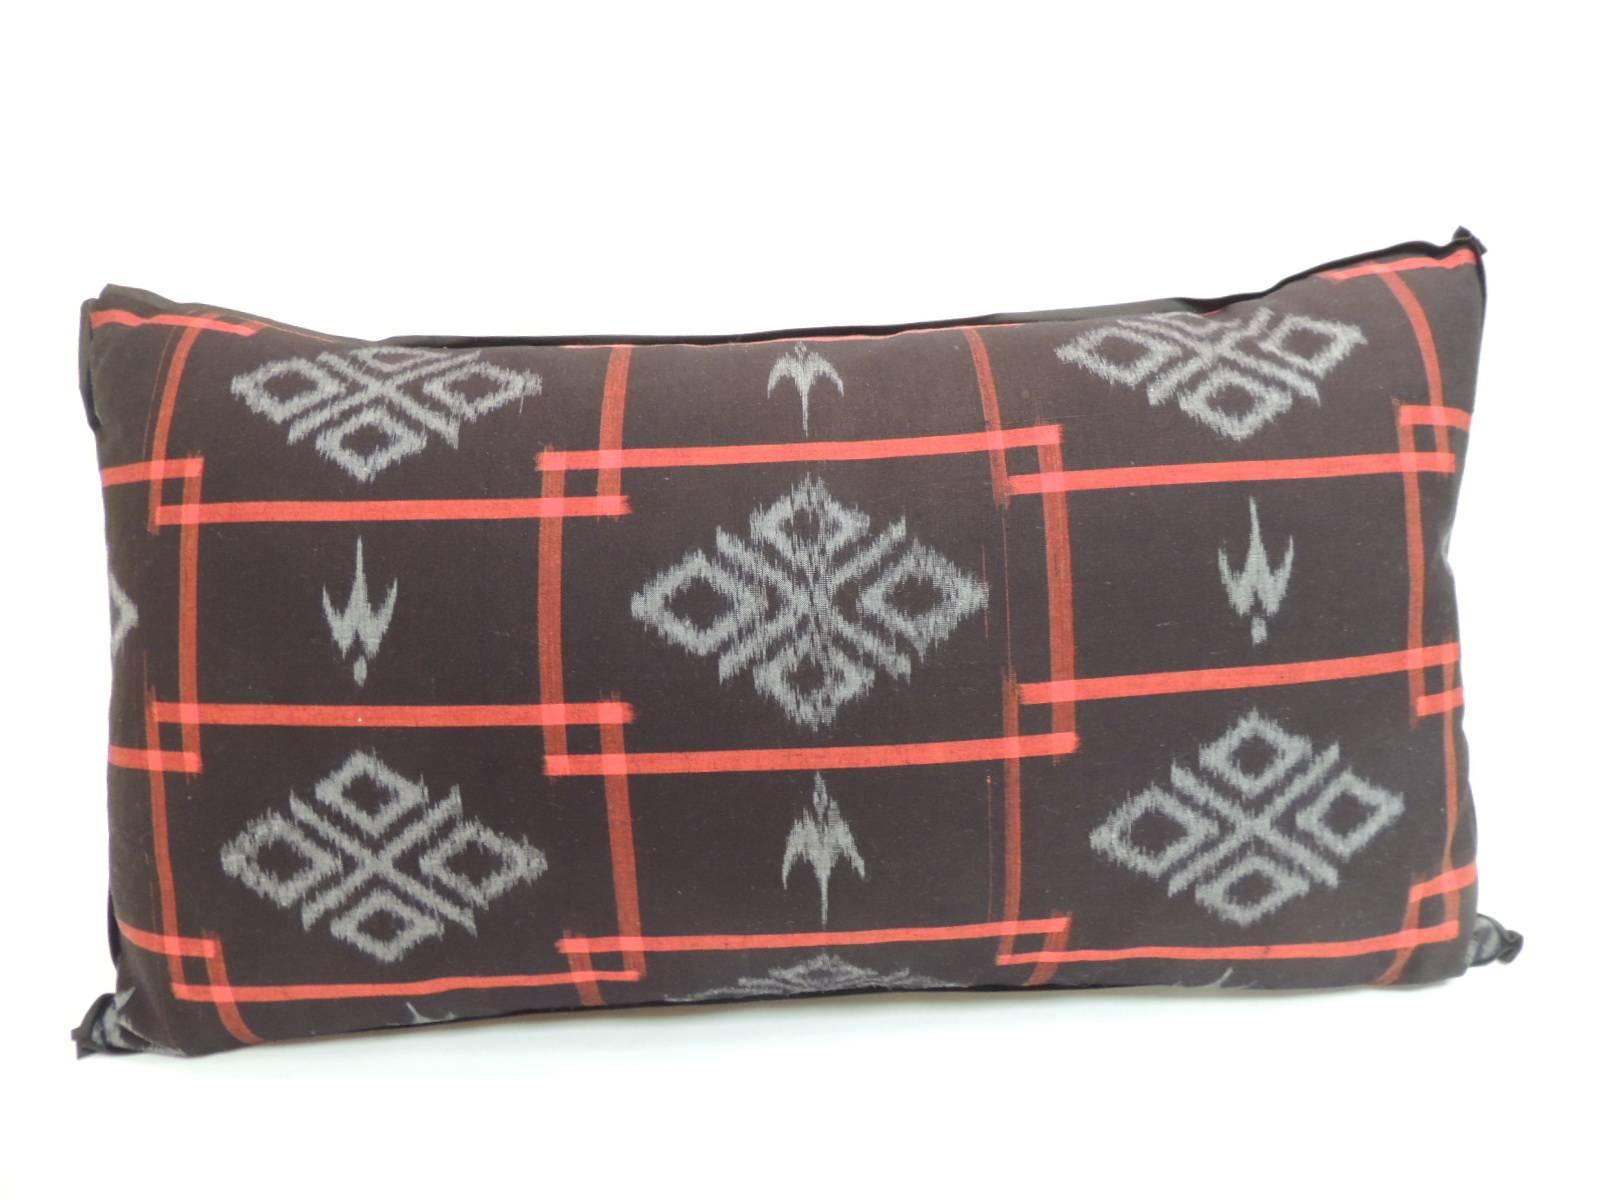 1960’s woven Red and Black Japanese Ikat graphic pattern bolster pillow with custom made black flat trim.  Decorative bolster pillow finished with a textured linen backing.  In shades of: black, red and blue.  Decorative bolster pillow handcrafted